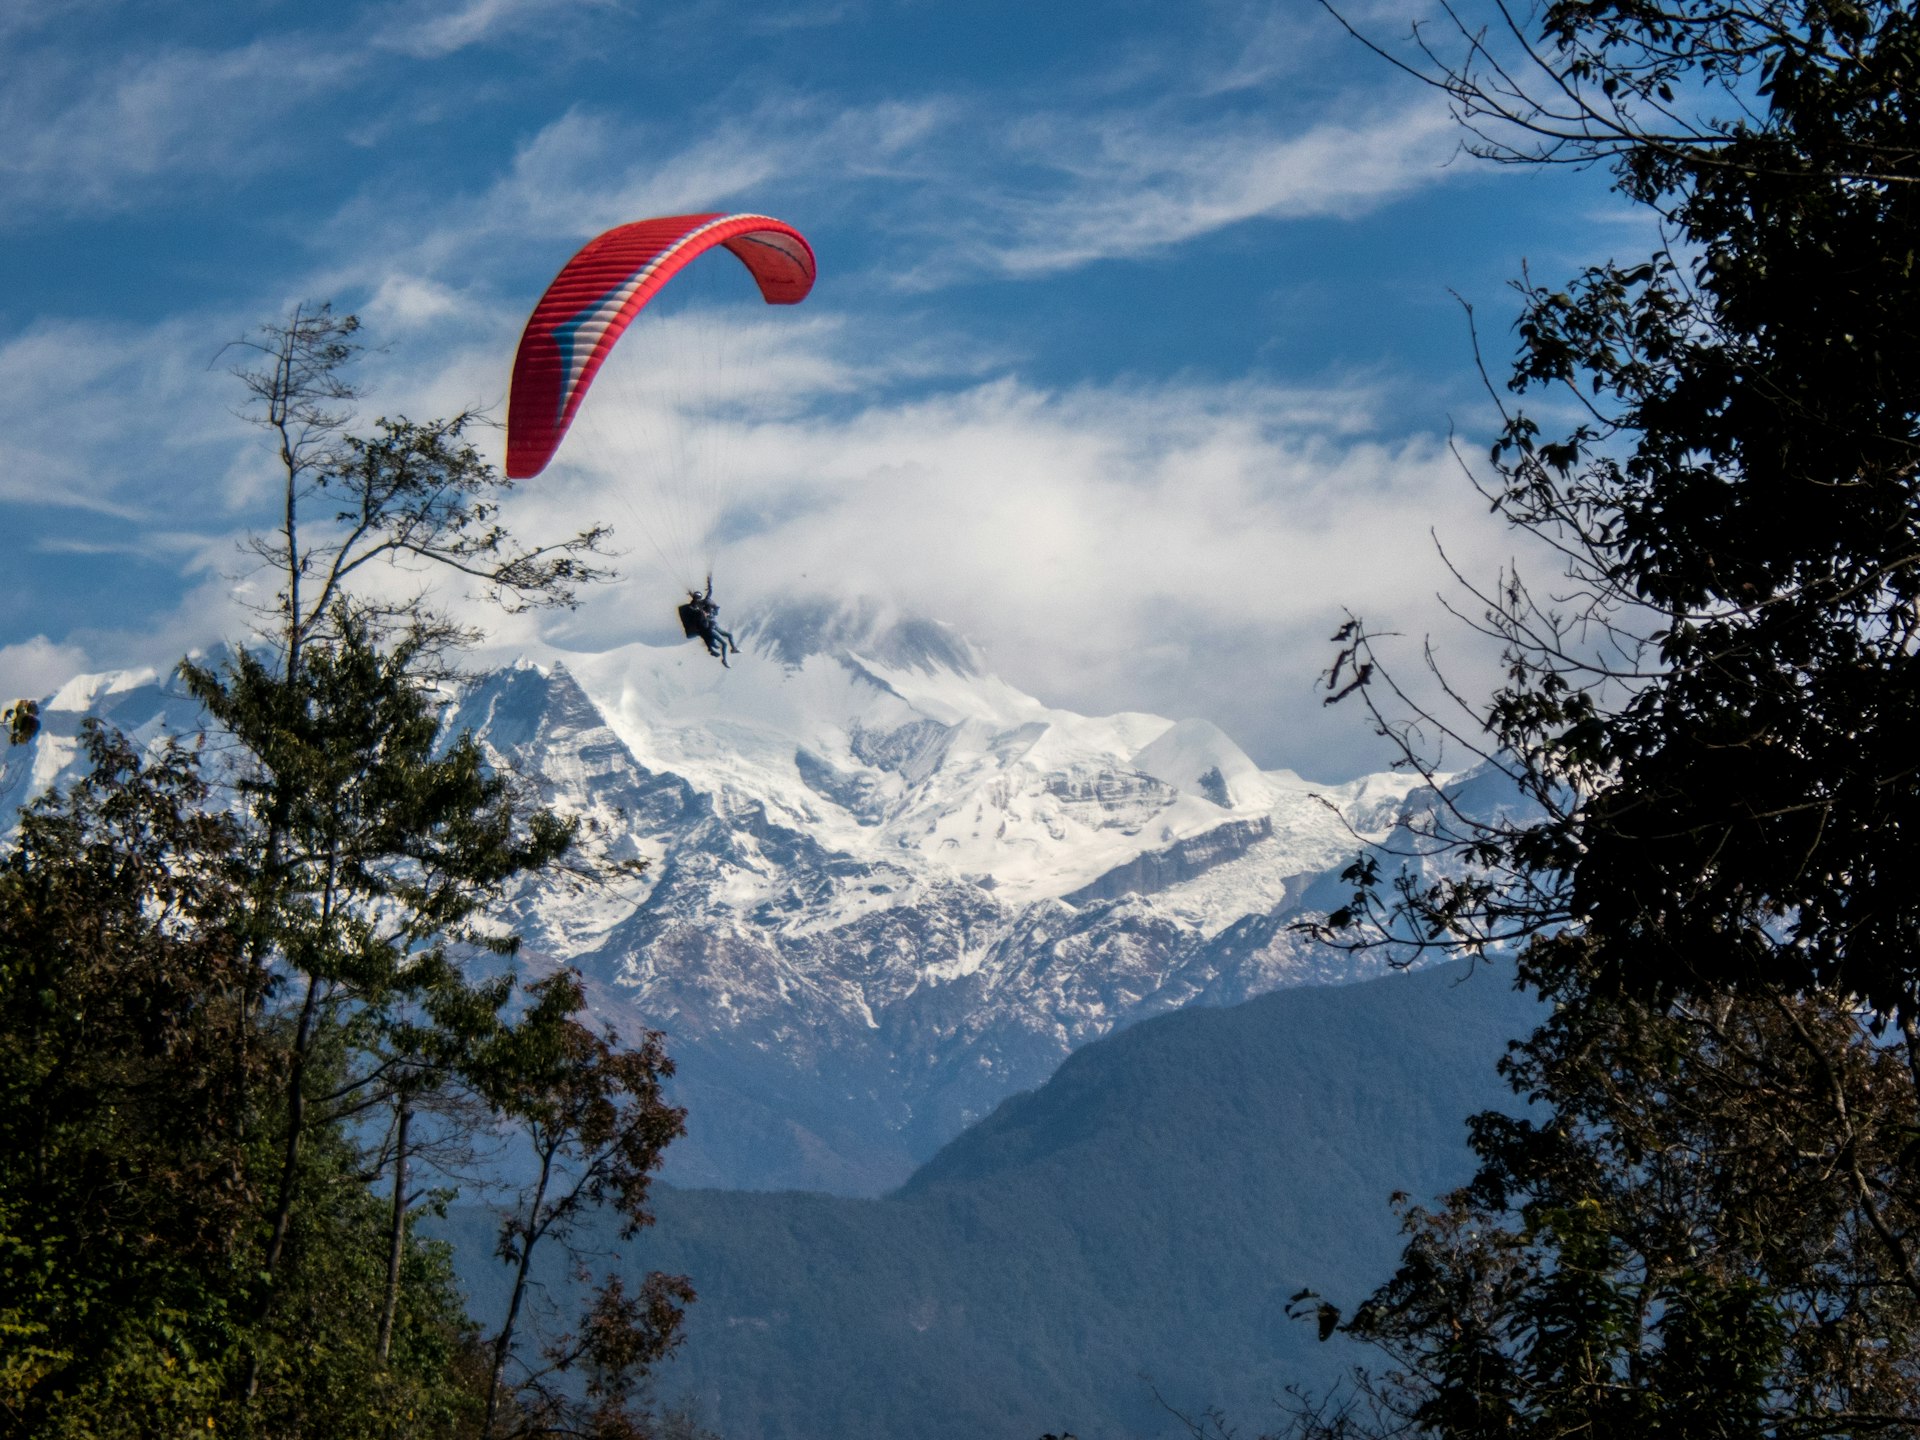 Tandem paragliders soar with the Himalaya in the background near Pokhara, Nepal